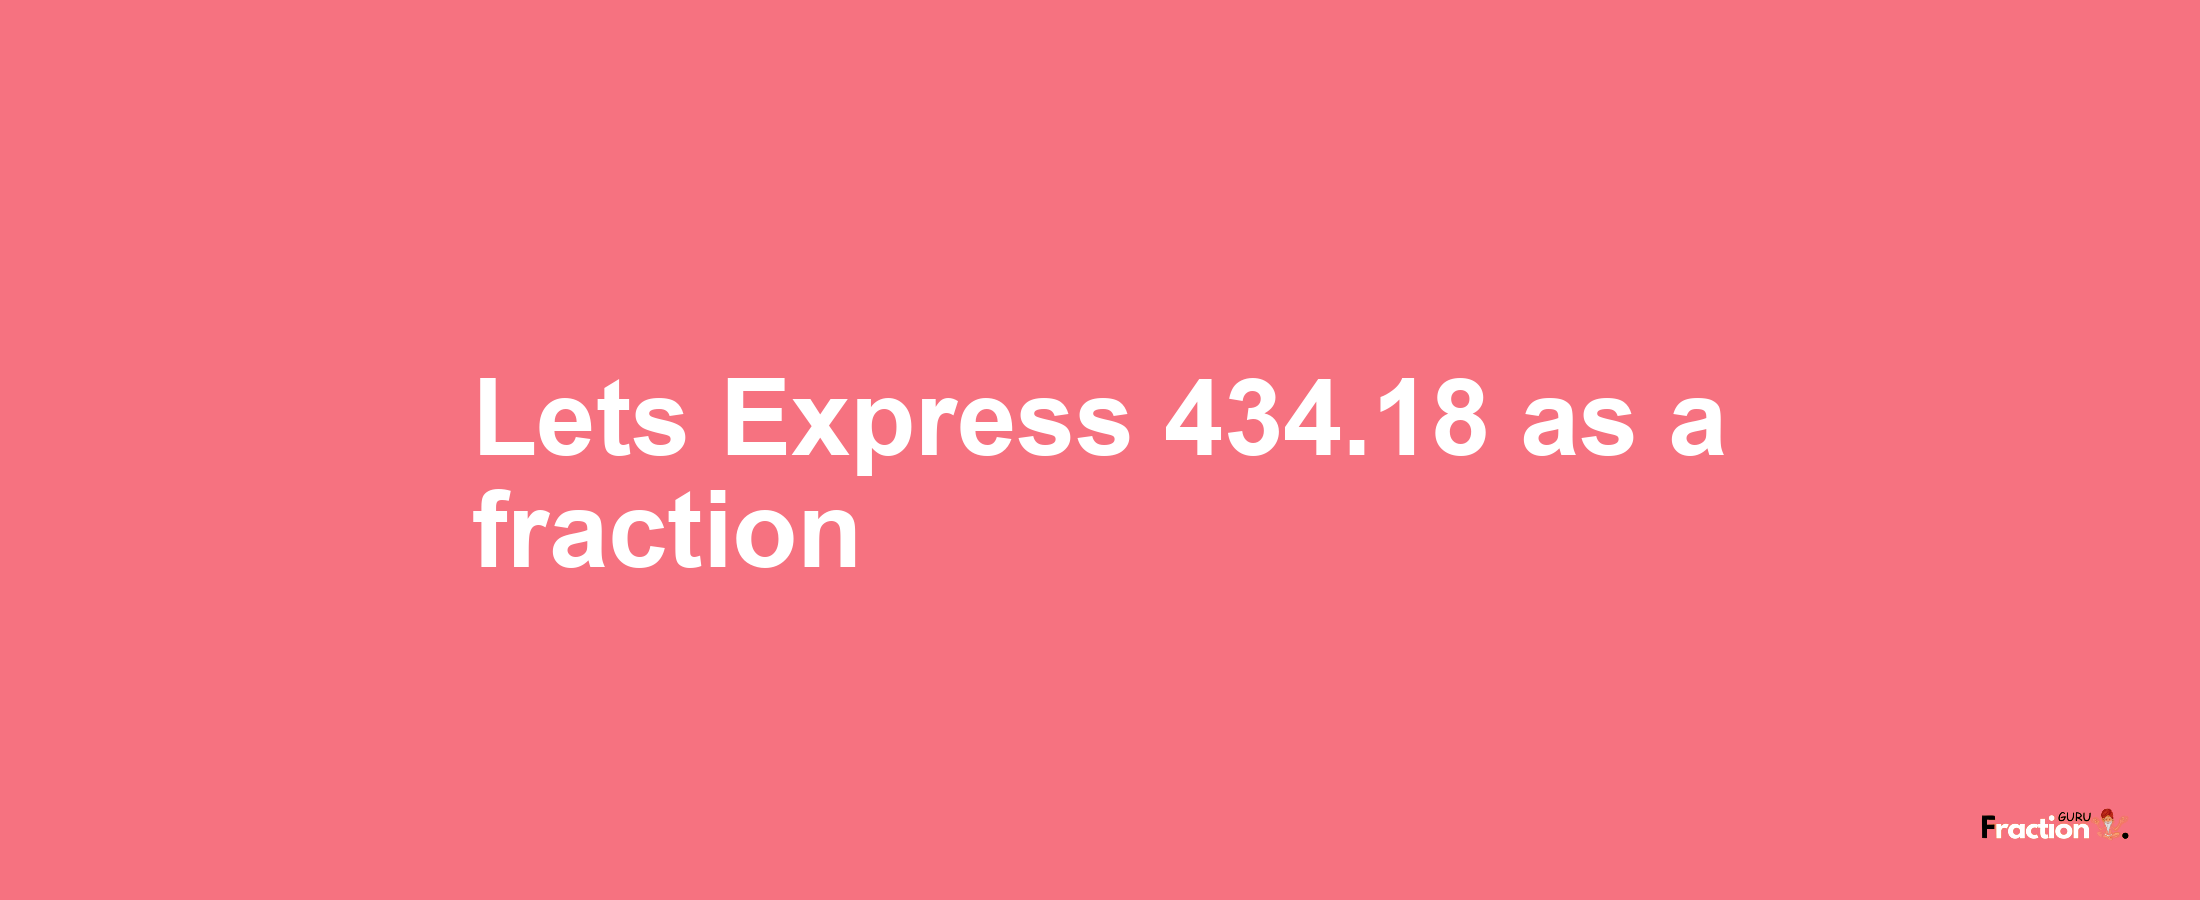 Lets Express 434.18 as afraction